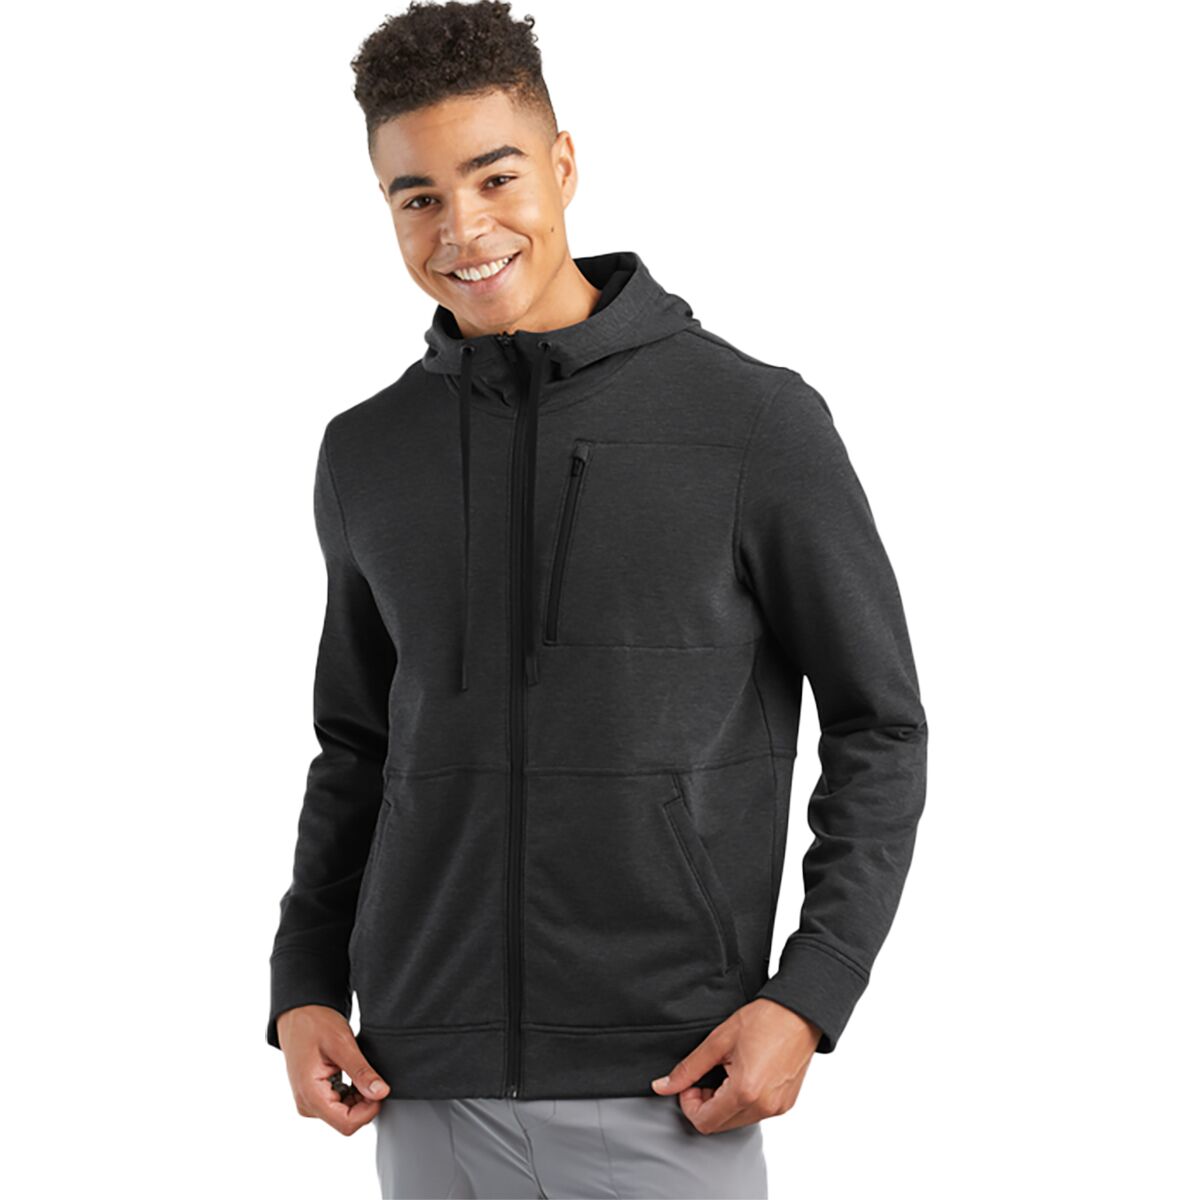 Outdoor Research Emersion Fleece Hooded Jacket - Men's - Clothing